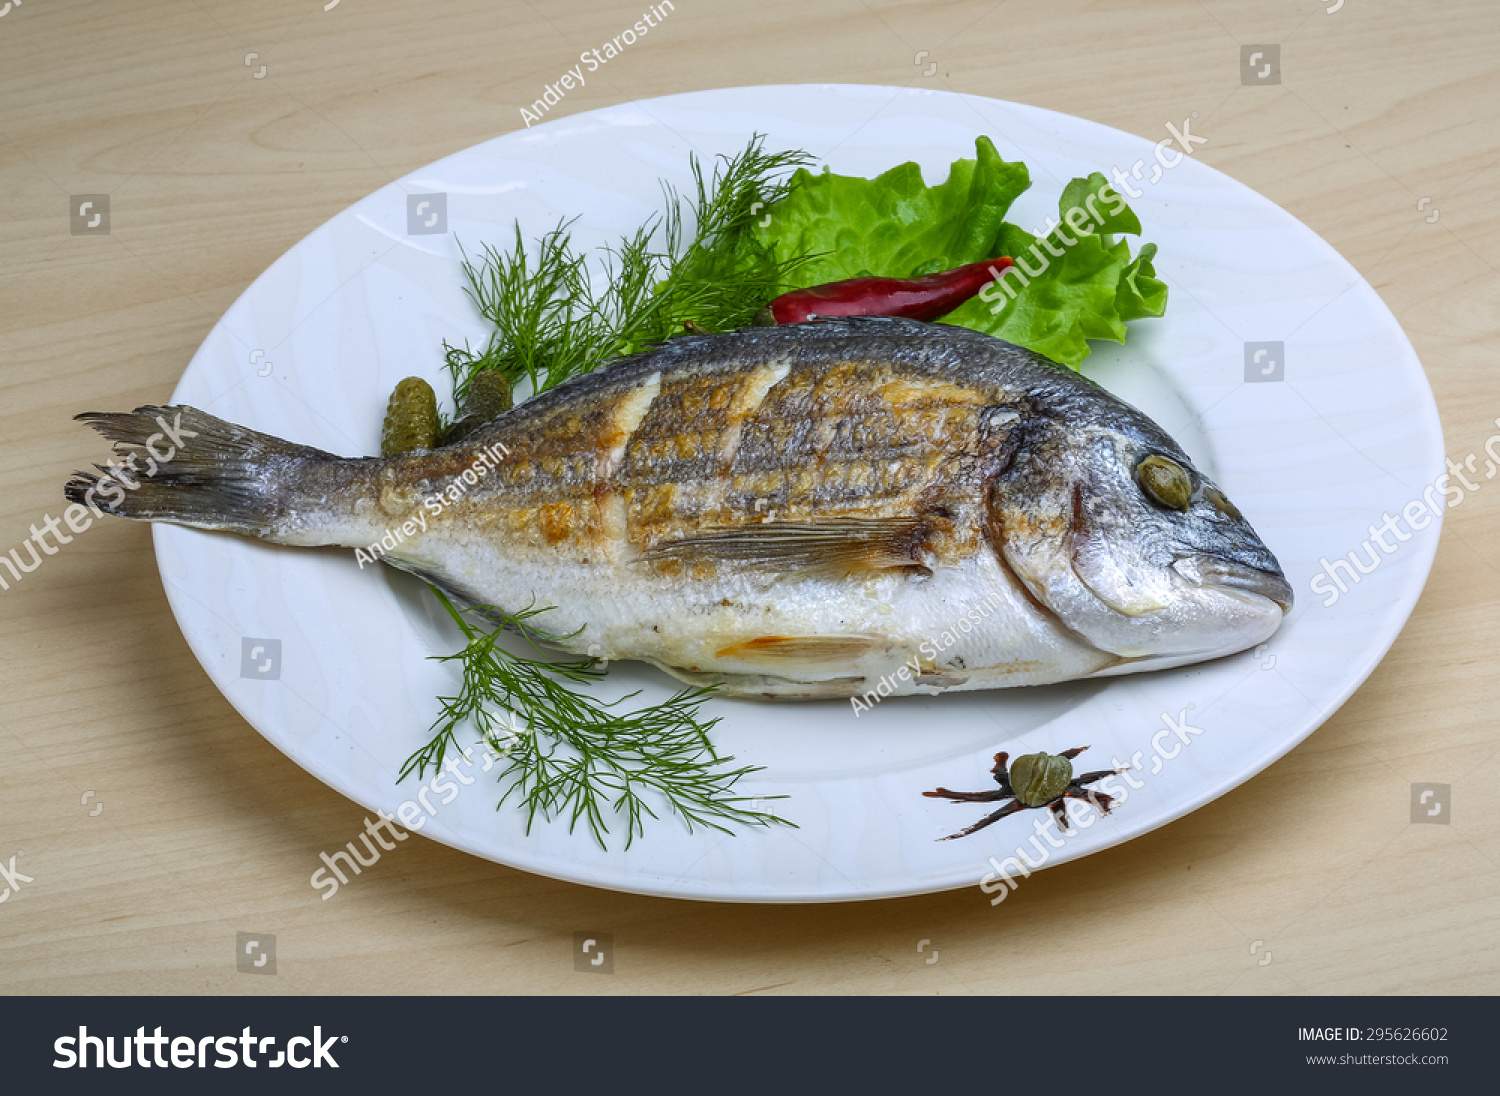 Grilled dorado with salad leaves and dill #295626602